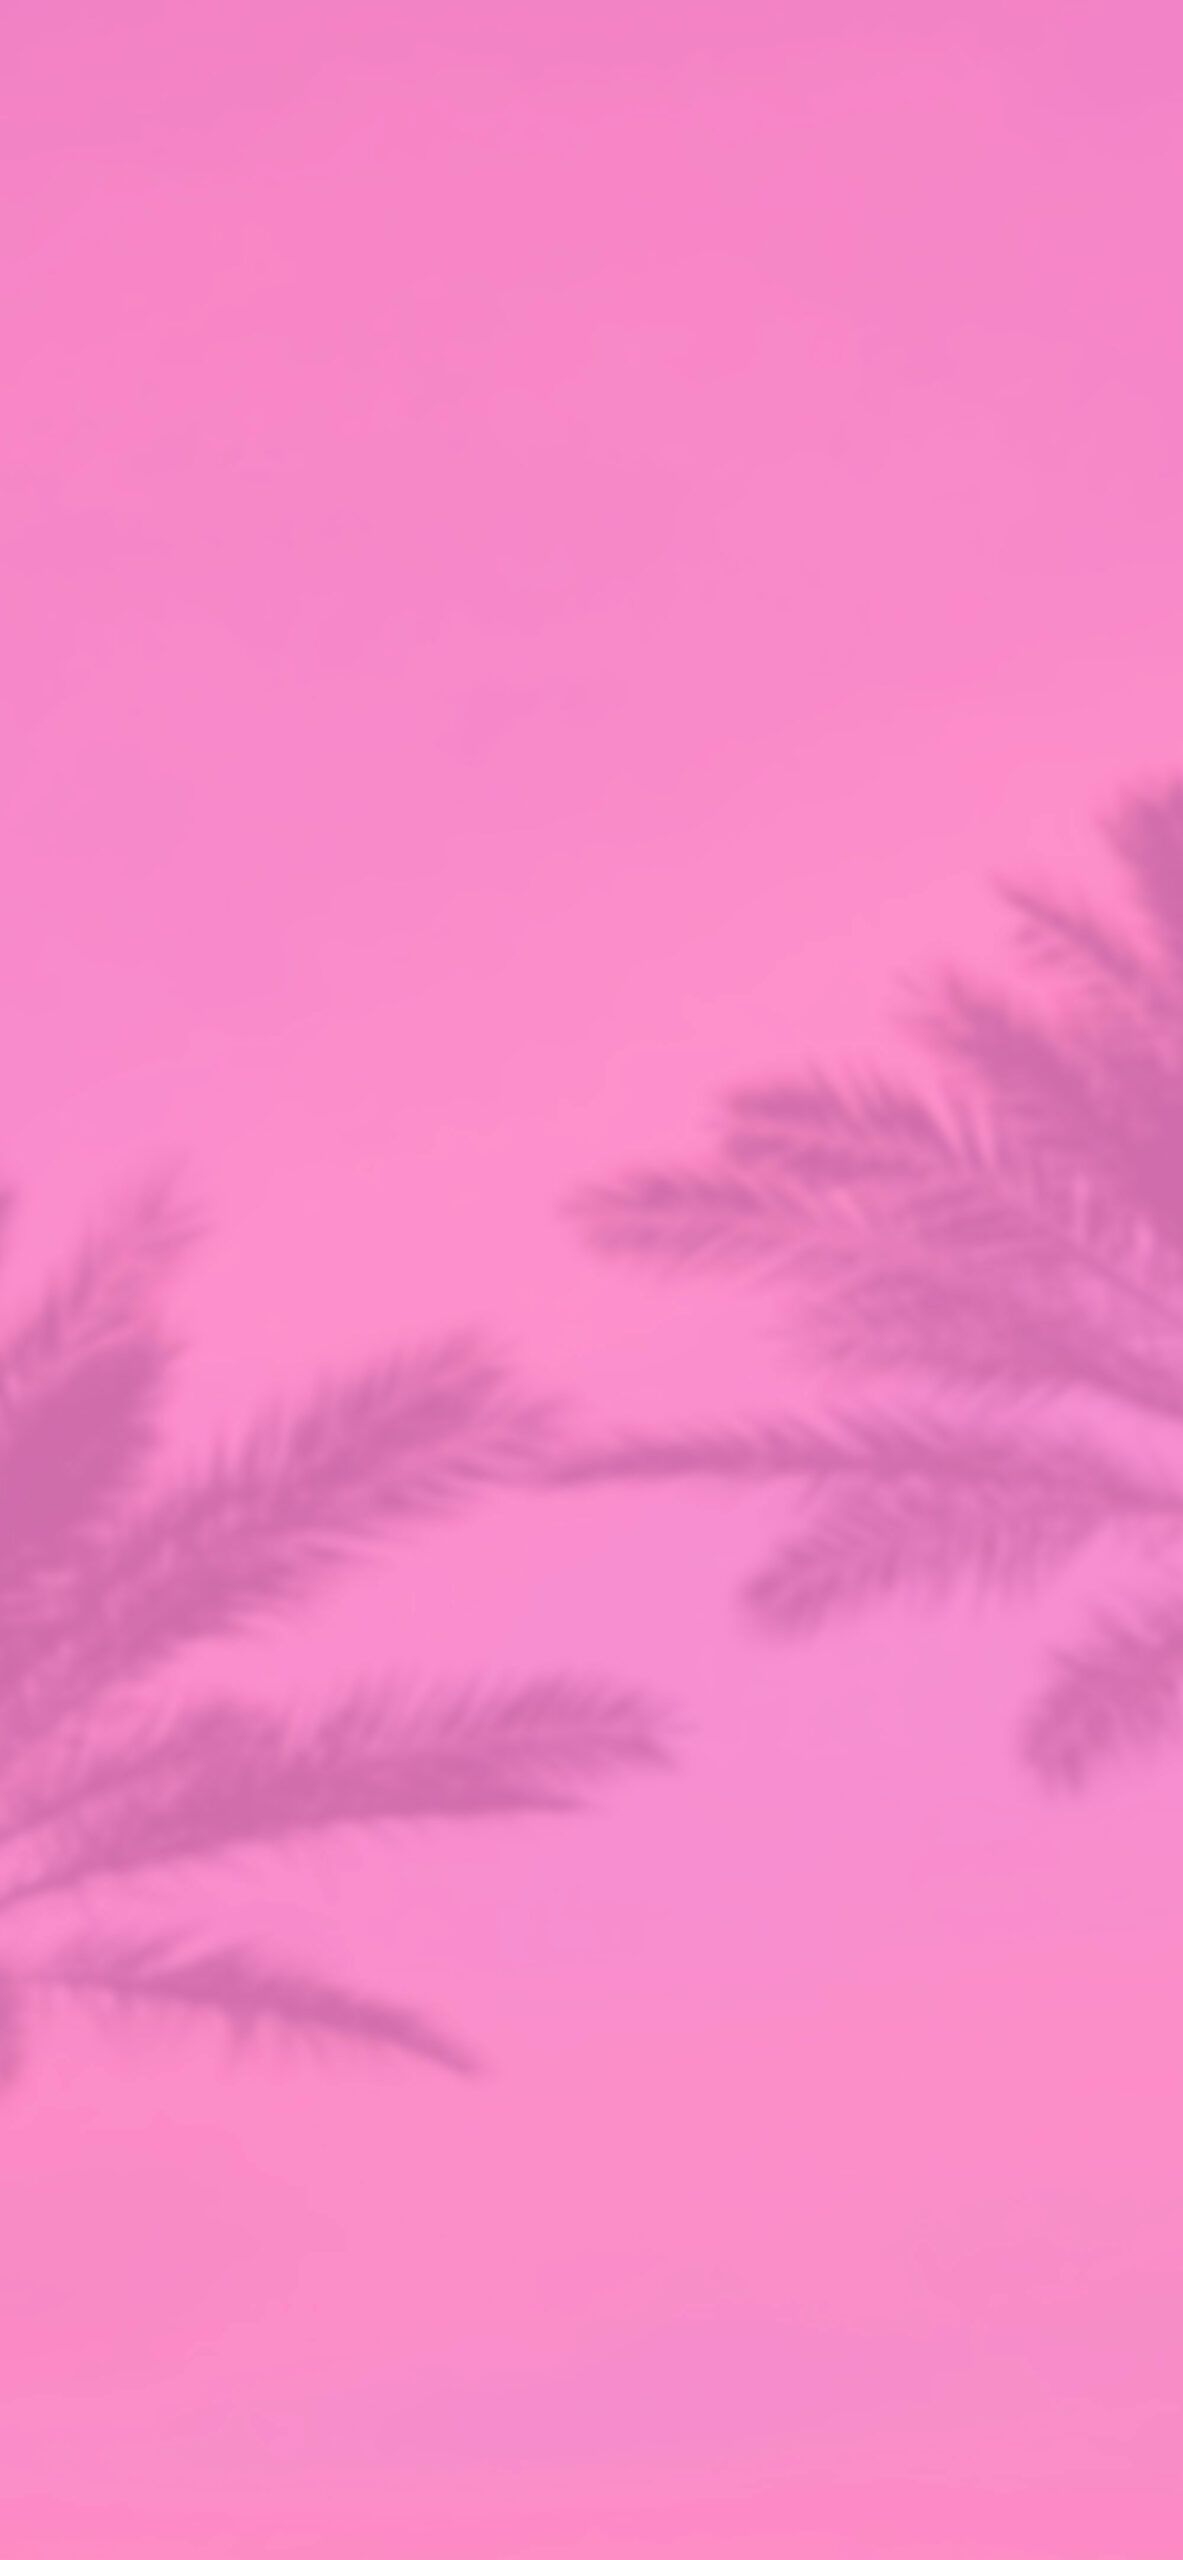 A pink background with a palm tree shadow - Pink, cute pink, pink phone, hot pink, soft pink, light pink